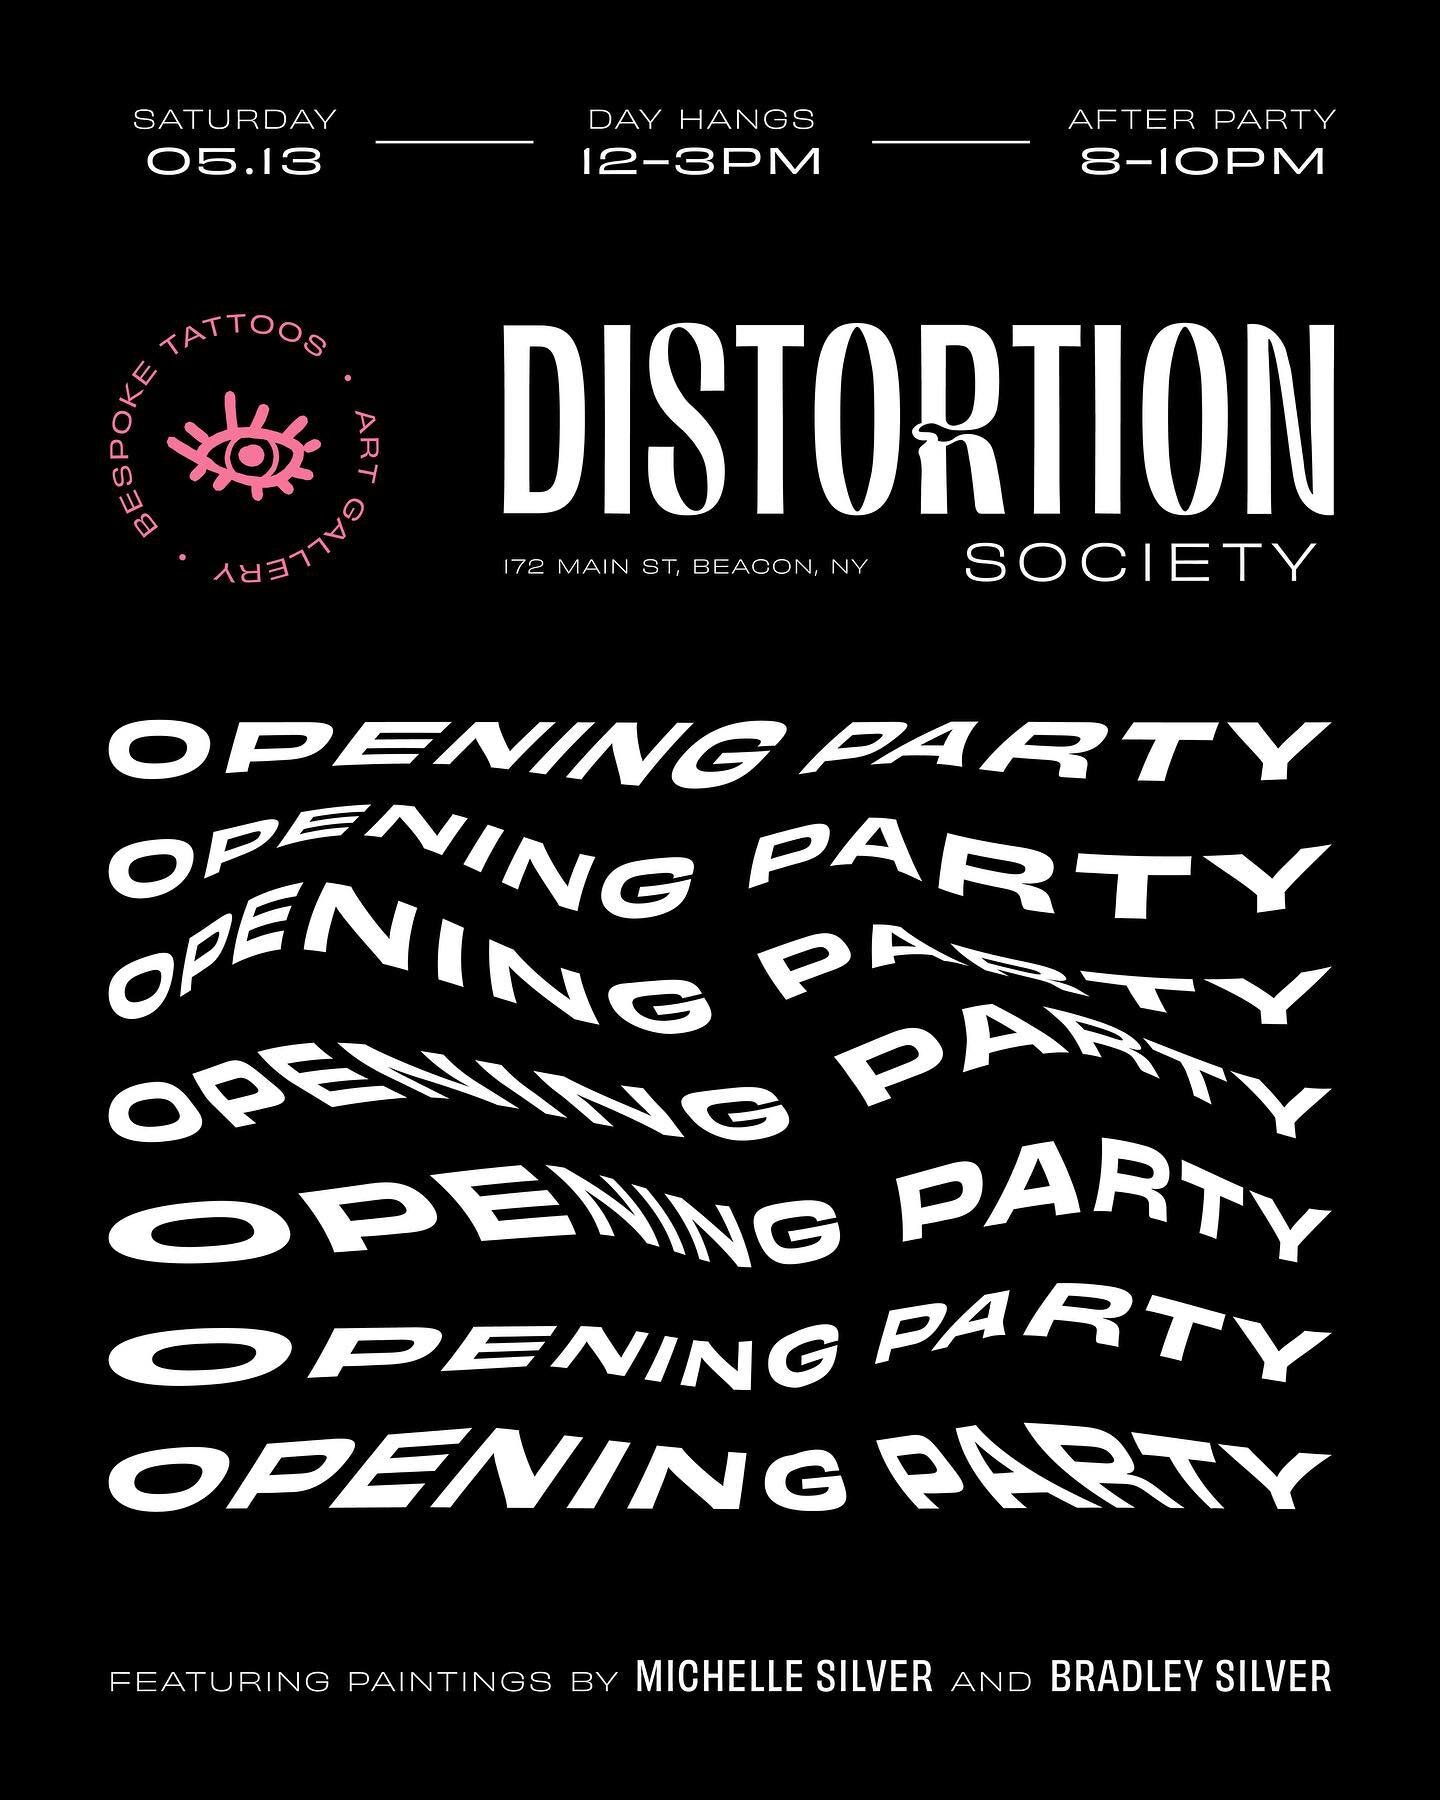 ⚡️OPENING PARTY⚡️ You&rsquo;re invited to the opening exhibition &amp; party for @bradleysilvertattoo and my new concept @distortion_society✨ Part contemporary art gallery and part bespoke tattoo studio, Distortion Society is a multi disciplinary art